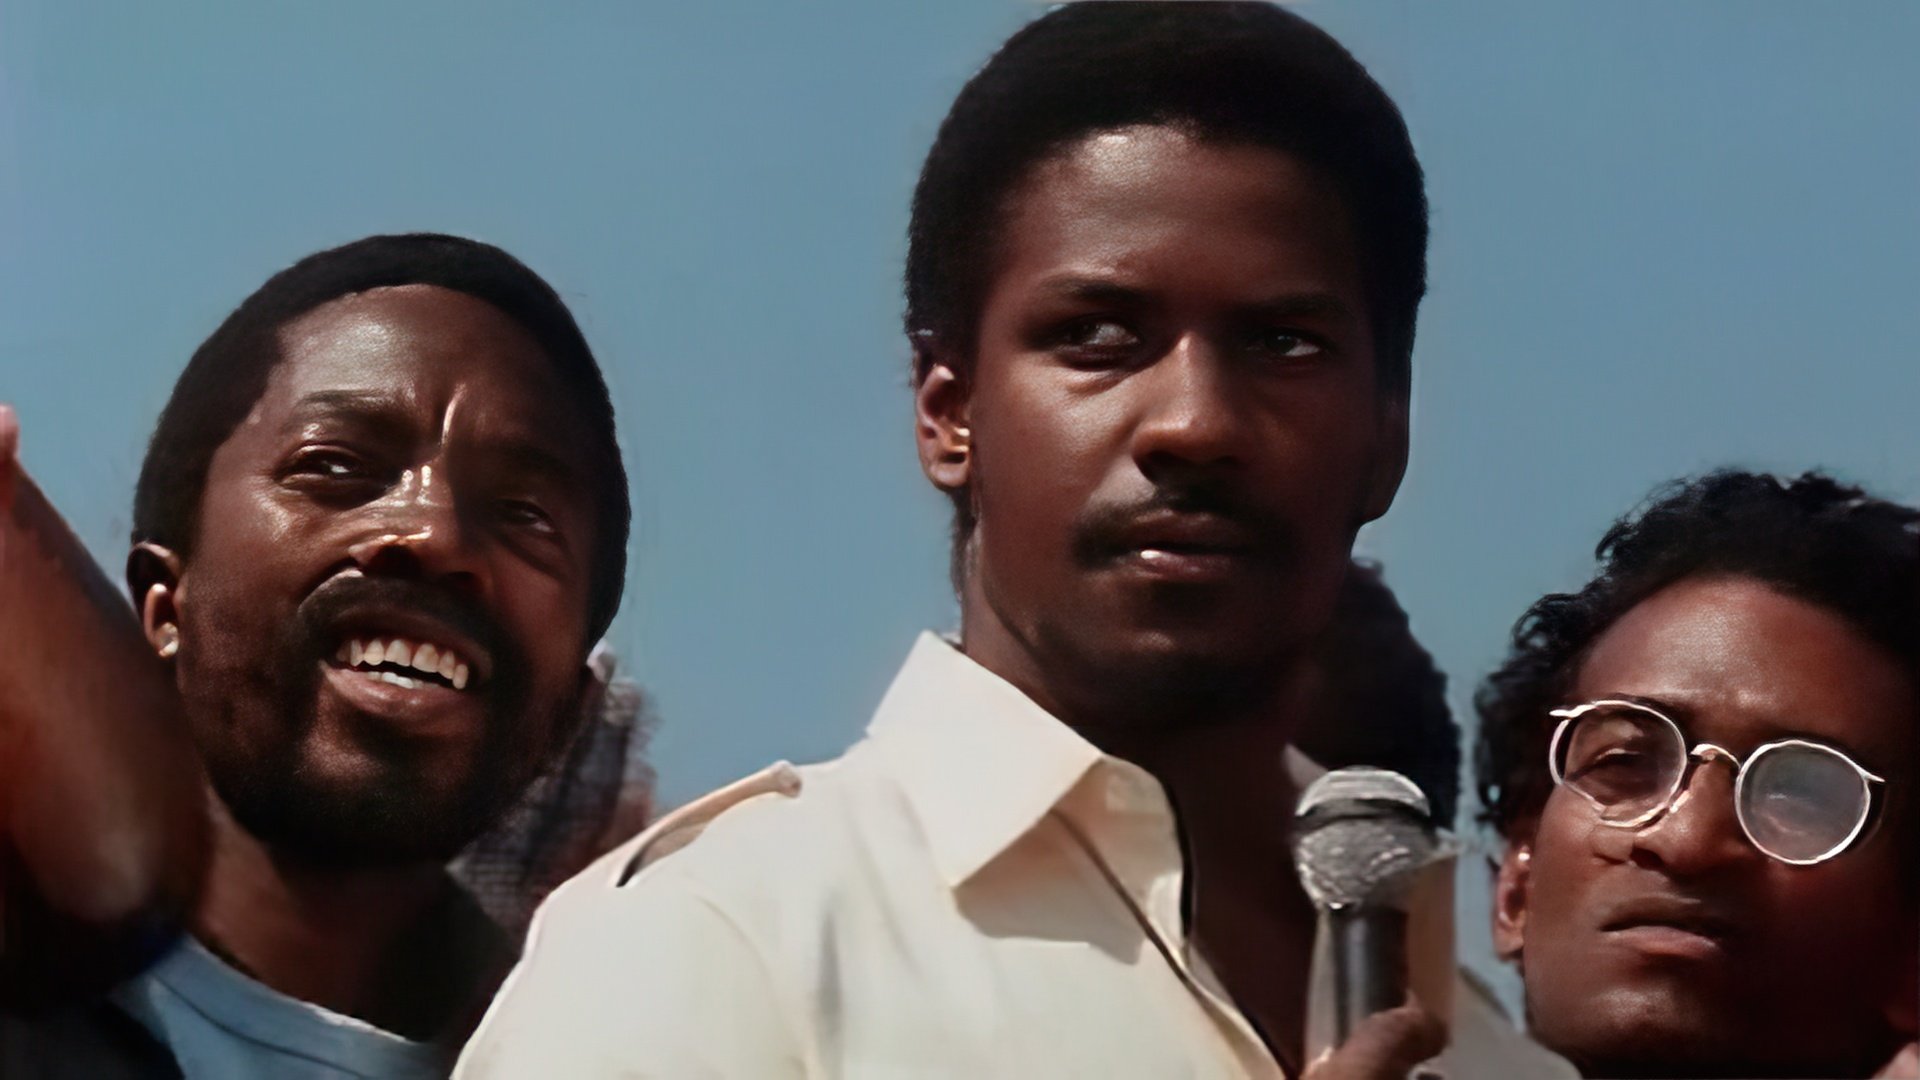 A still from the movie Cry Freedom